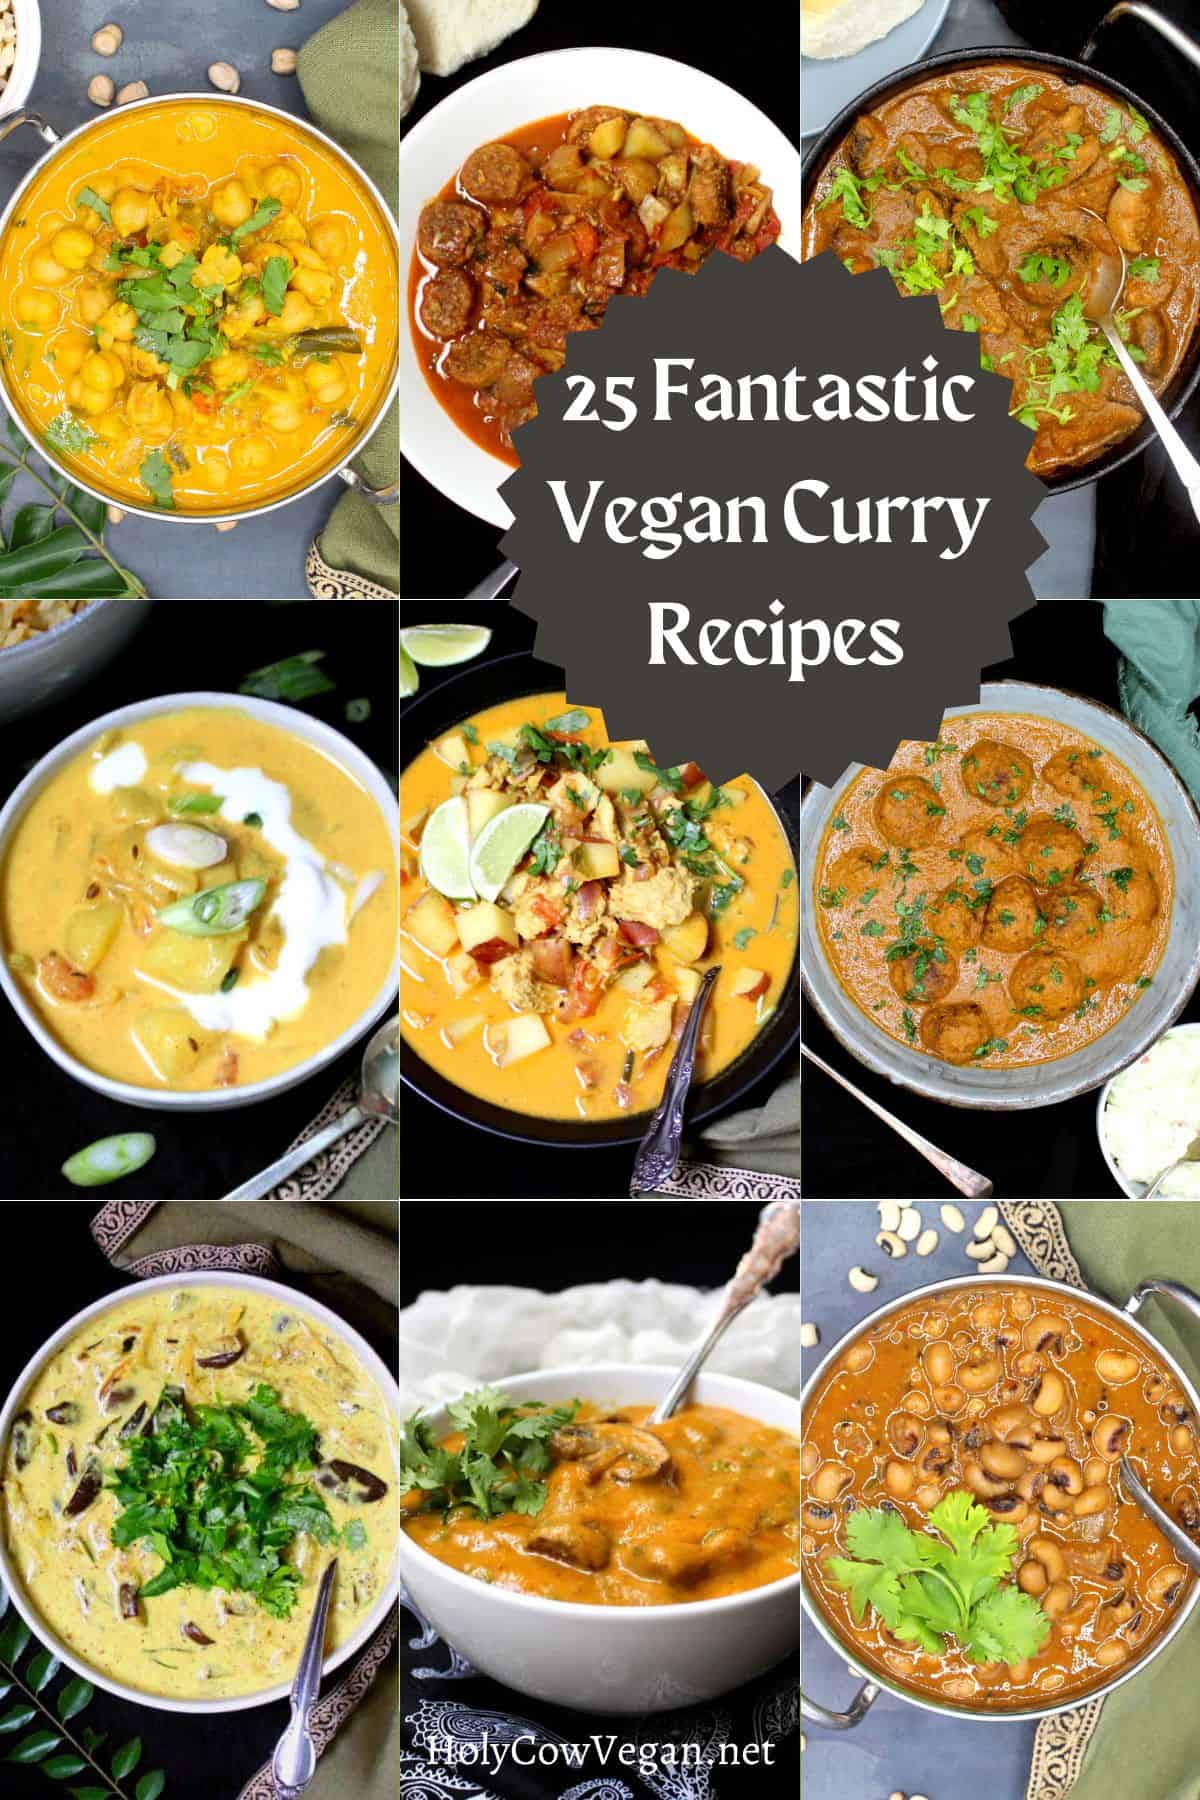 Images of 9 vegan curries with text that says "25 fantastic vegan curry recipes."